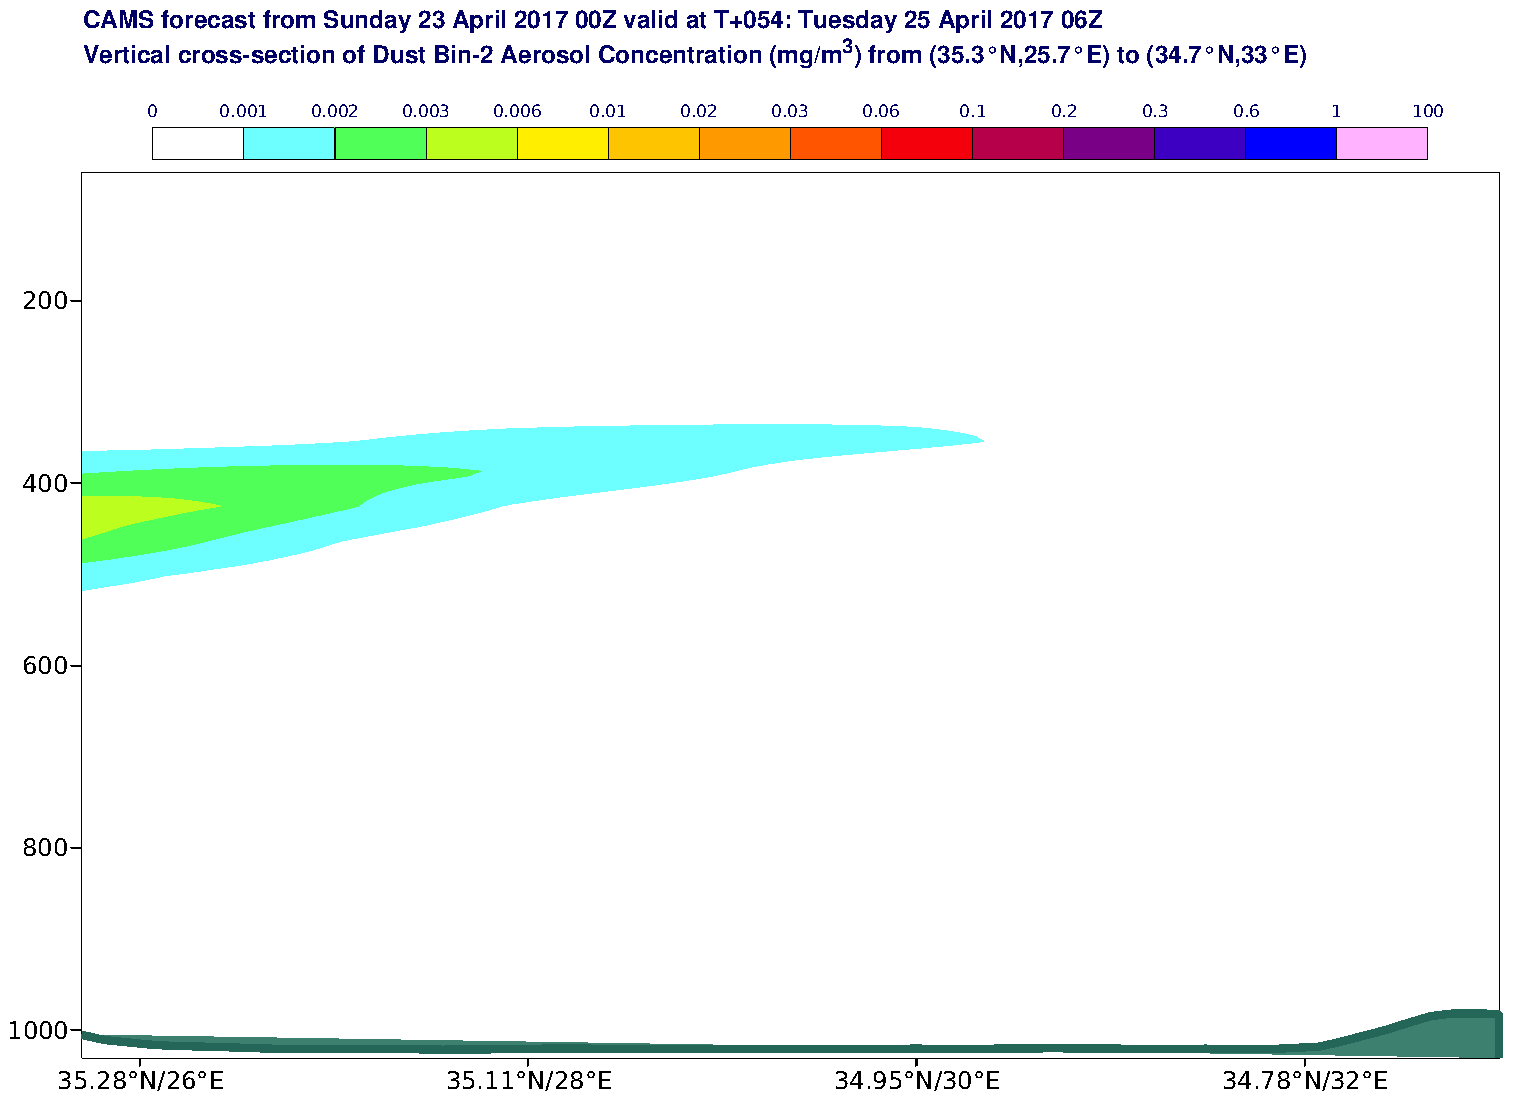 Vertical cross-section of Dust Bin-2 Aerosol Concentration (mg/m3) valid at T54 - 2017-04-25 06:00